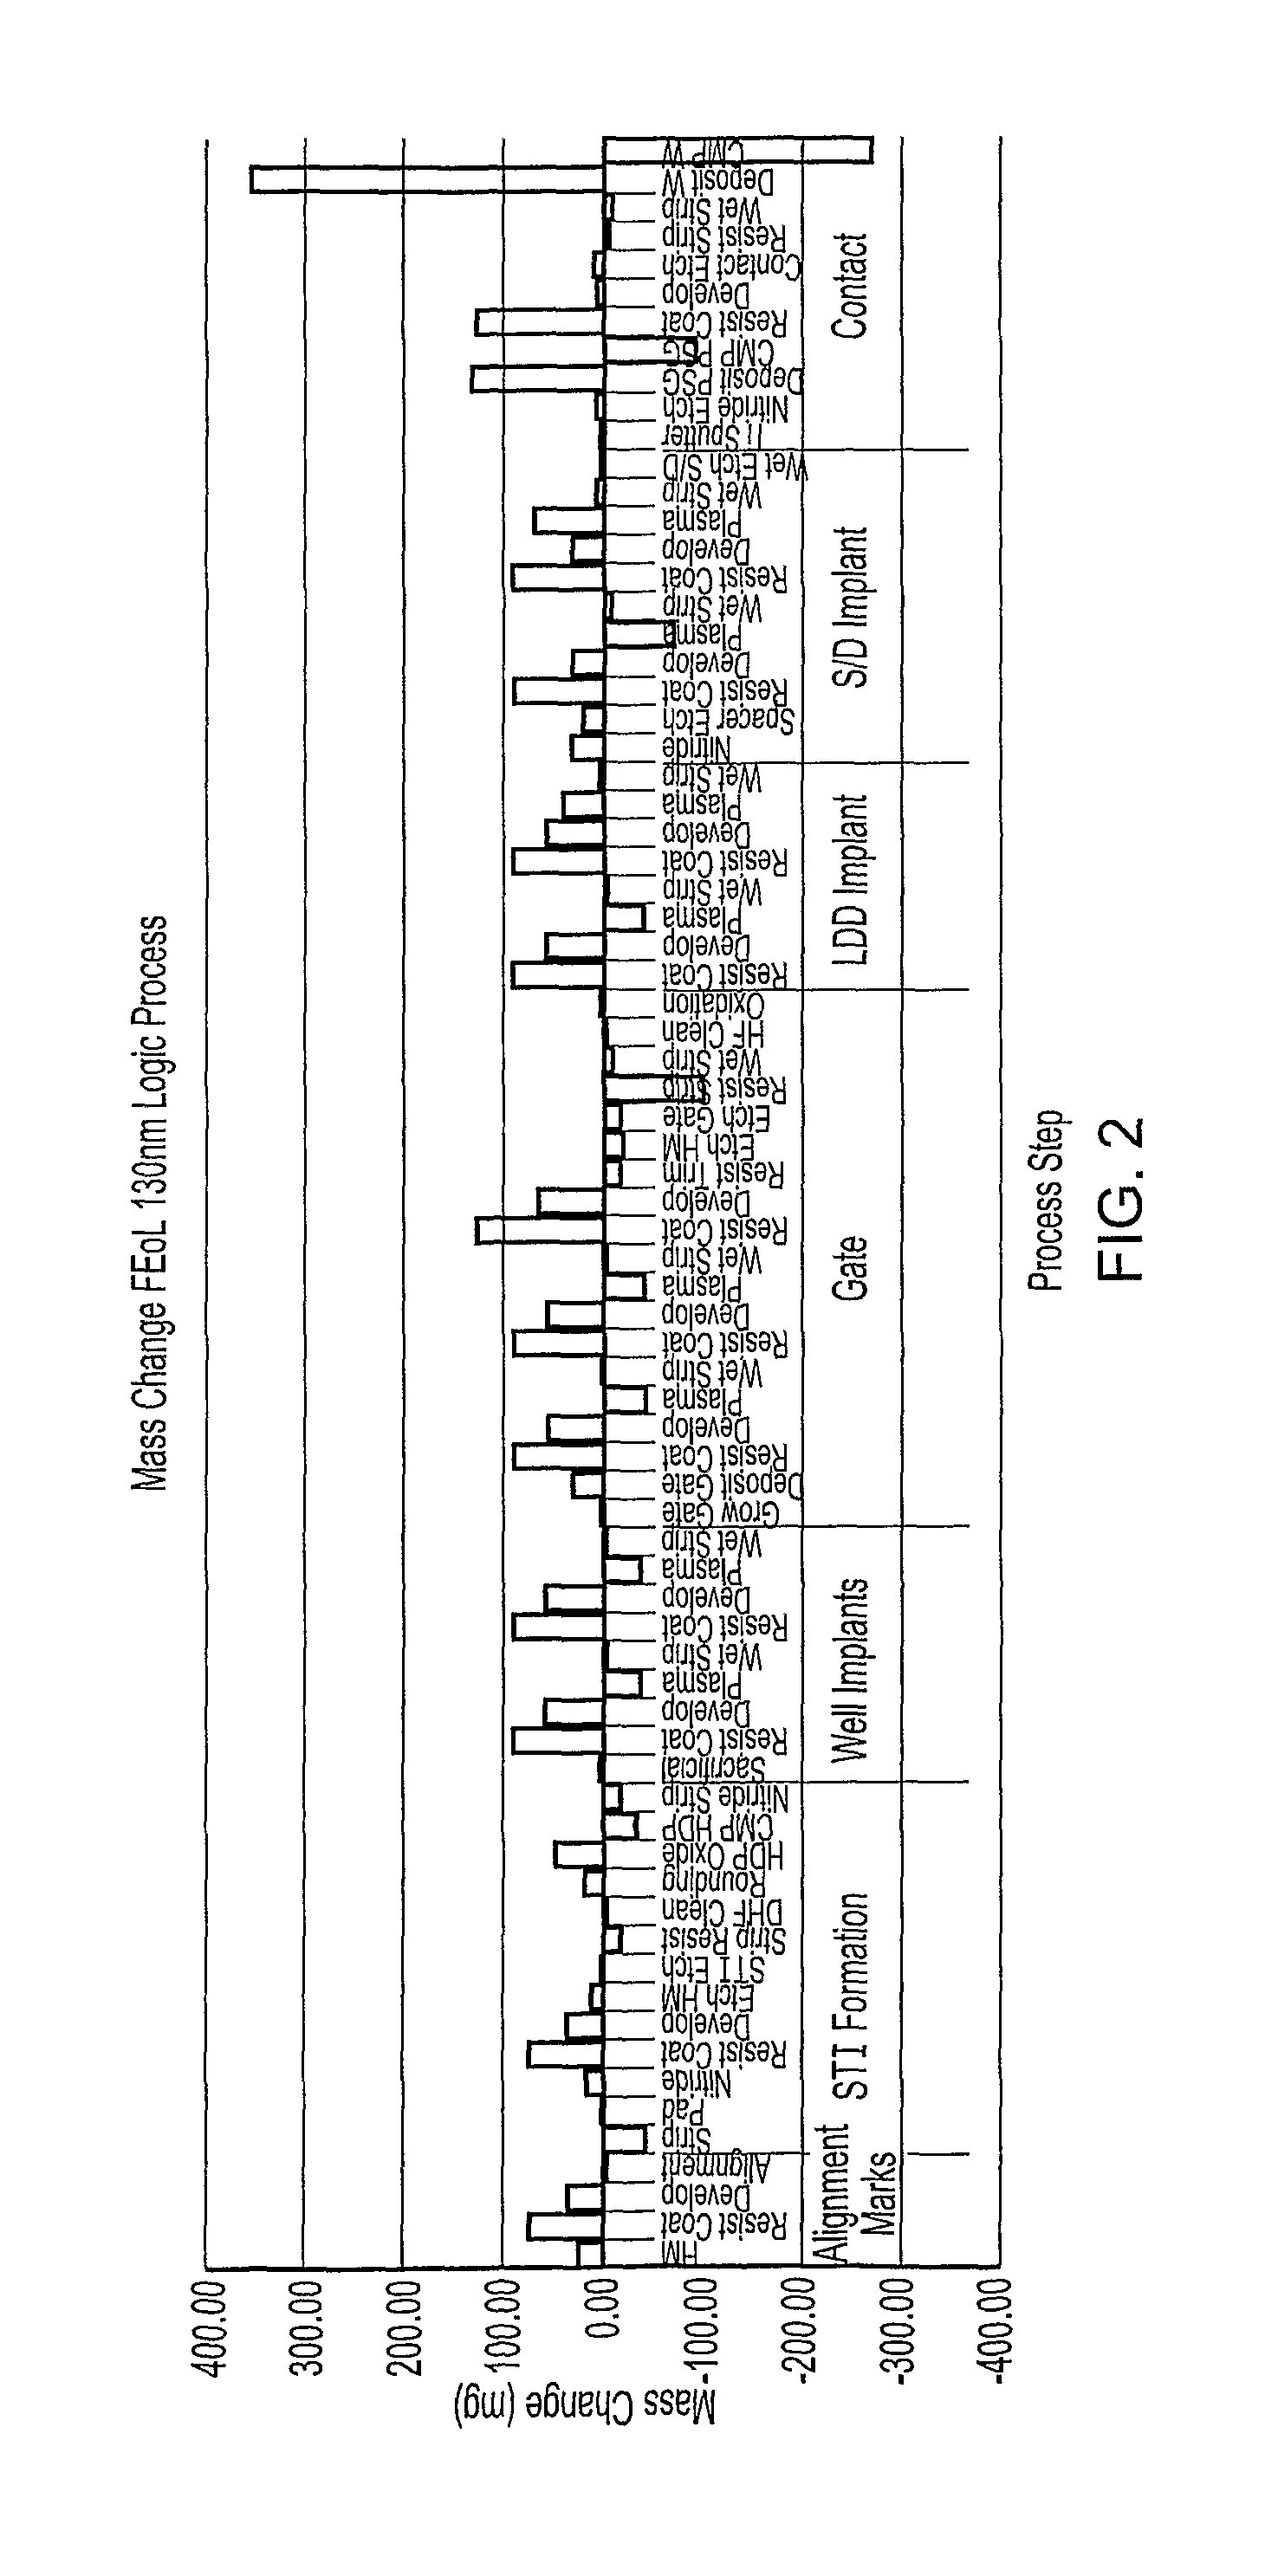 Method of controlling semiconductor device fabrication